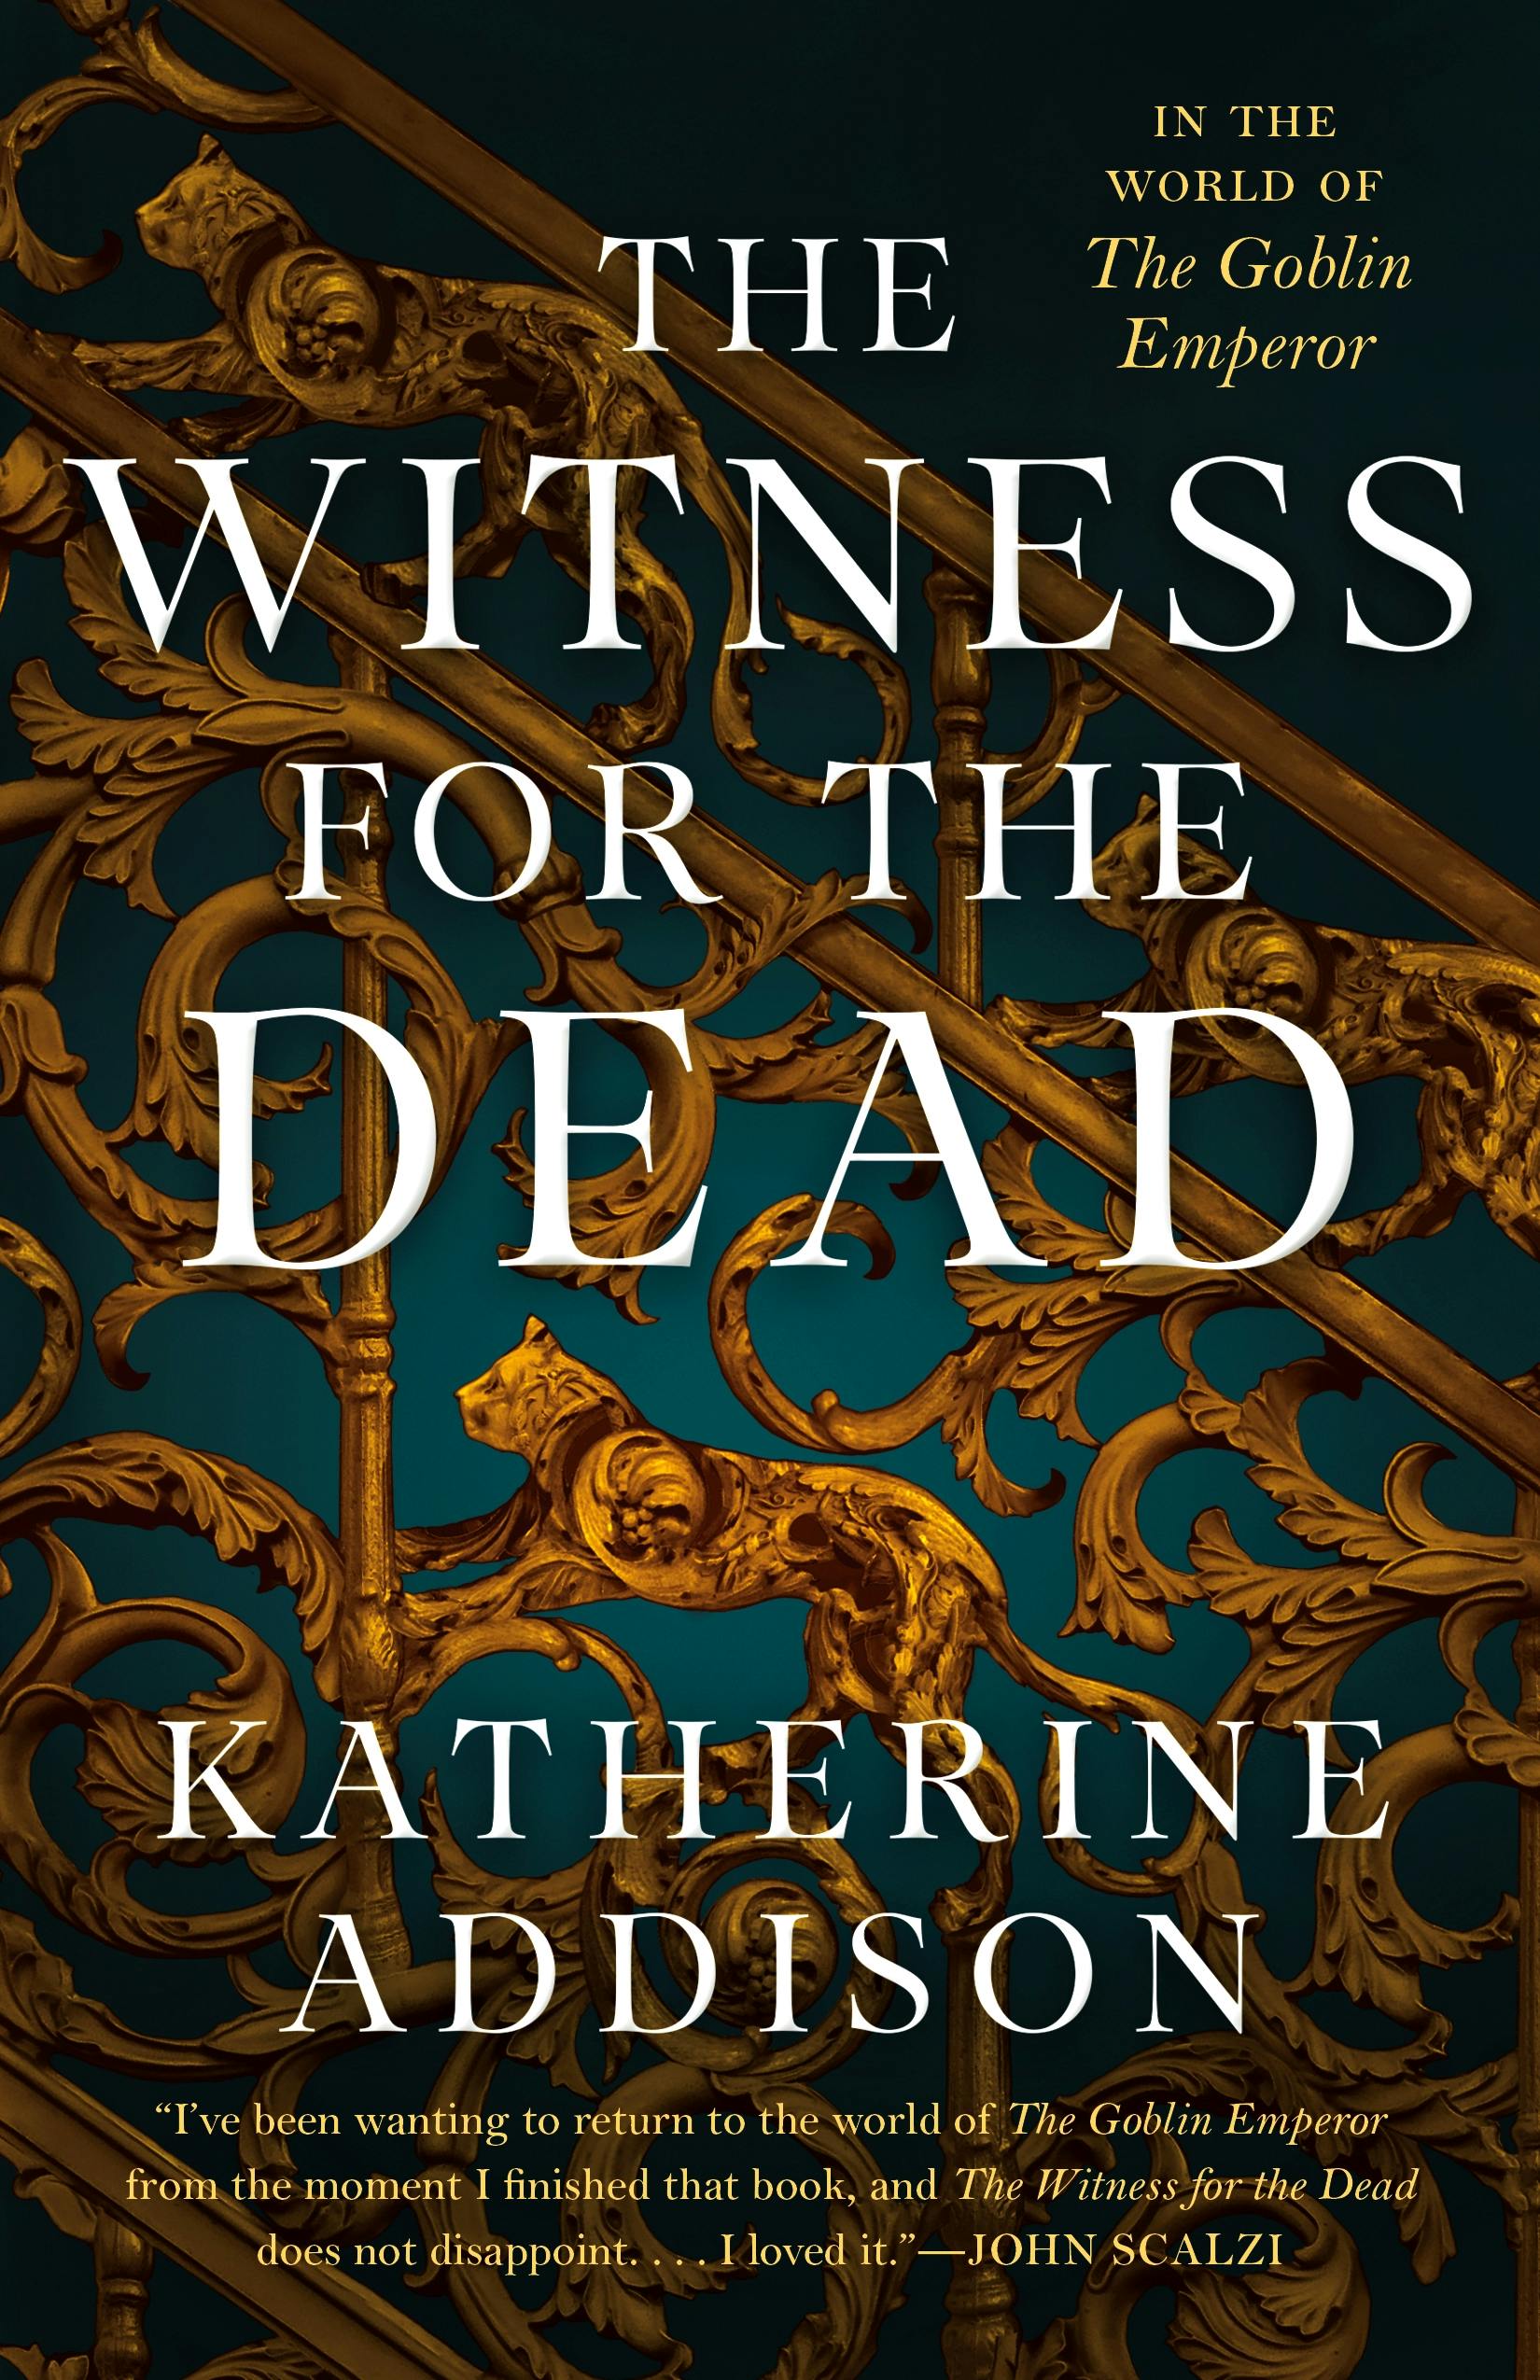 Cover for the book titled as: The Witness for the Dead